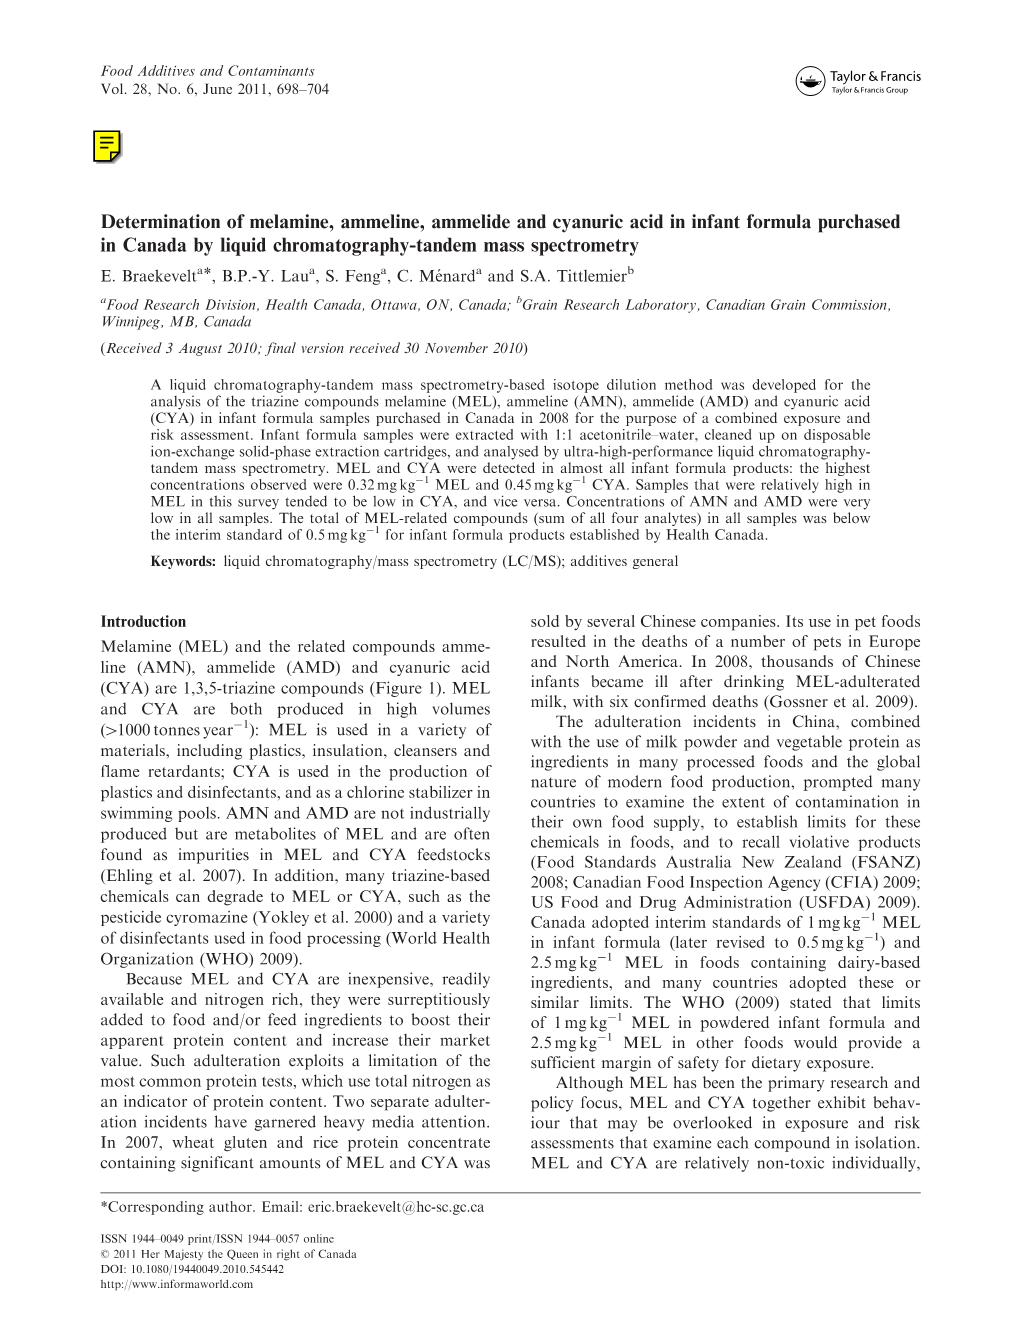 Determination of Melamine, Ammeline, Ammelide and Cyanuric Acid in Infant Formula Purchased in Canada by Liquid Chromatography-Tandem Mass Spectrometry E